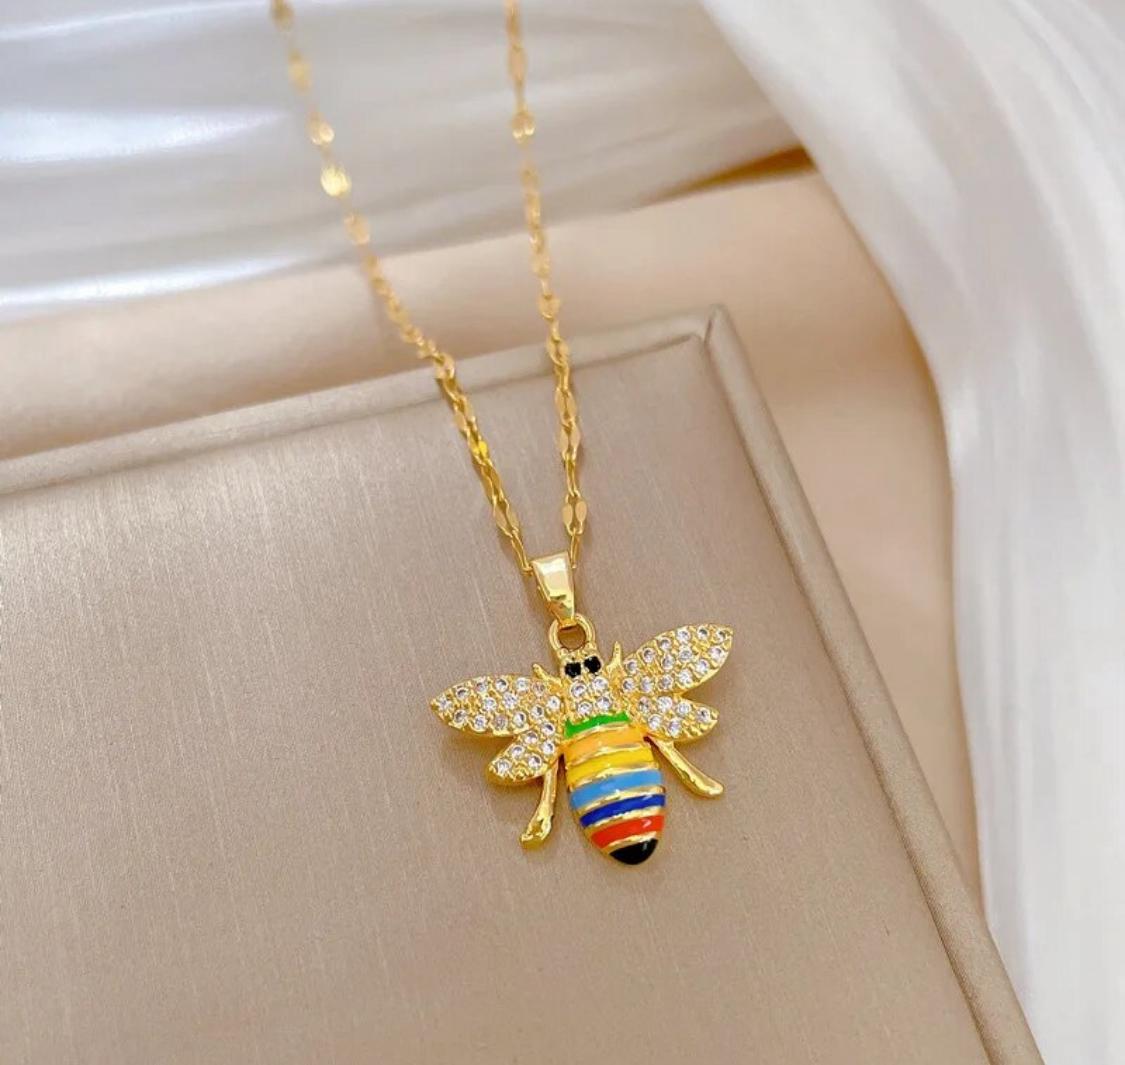 Colorful Bees Pendant Necklace